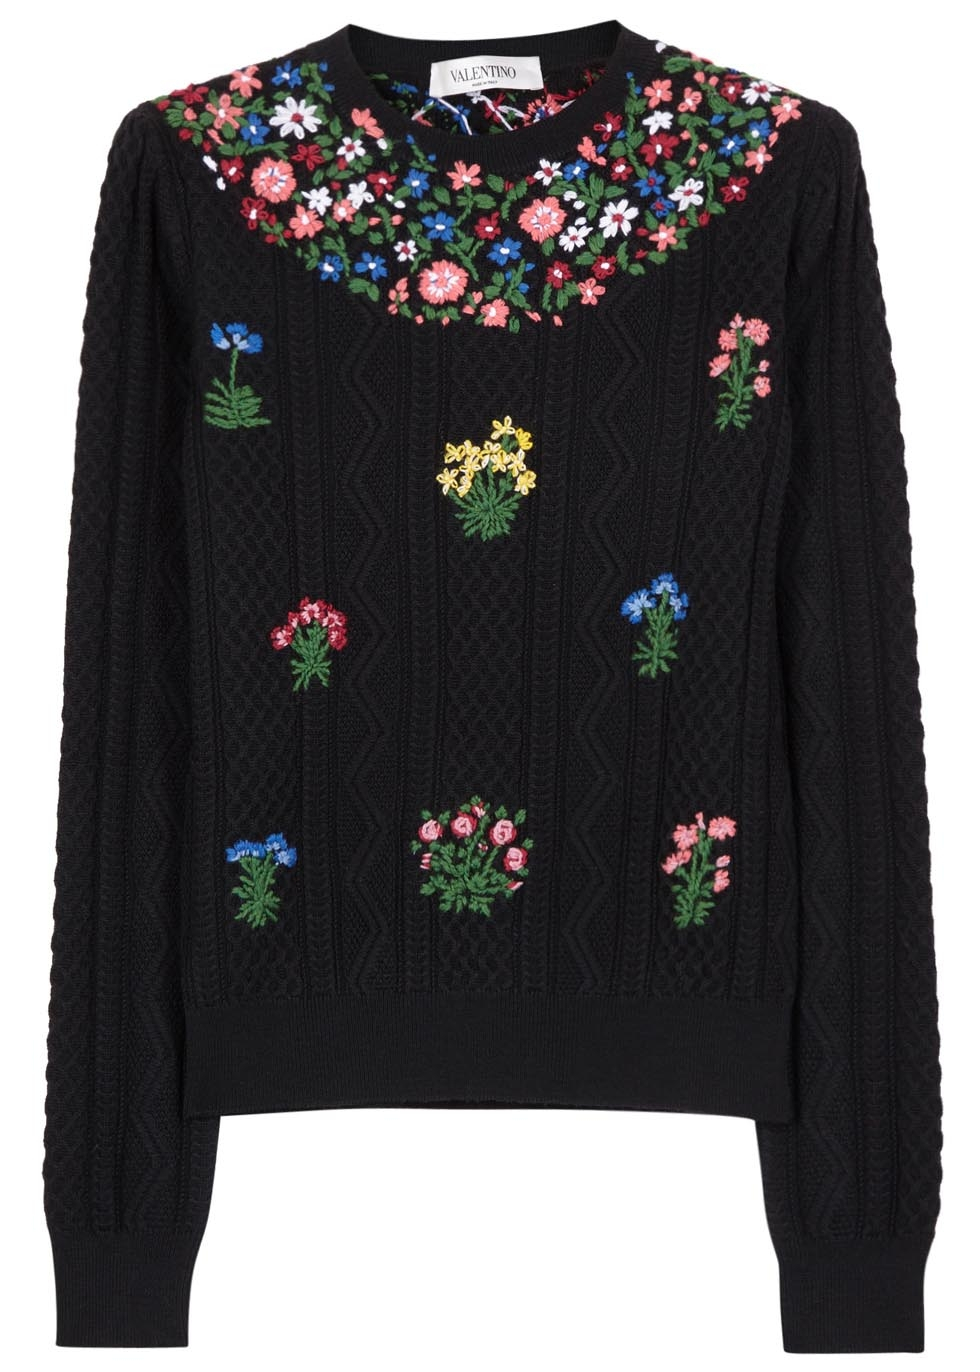 Valentino Black Floral Embroidered Wool Jumper in Black | Lyst